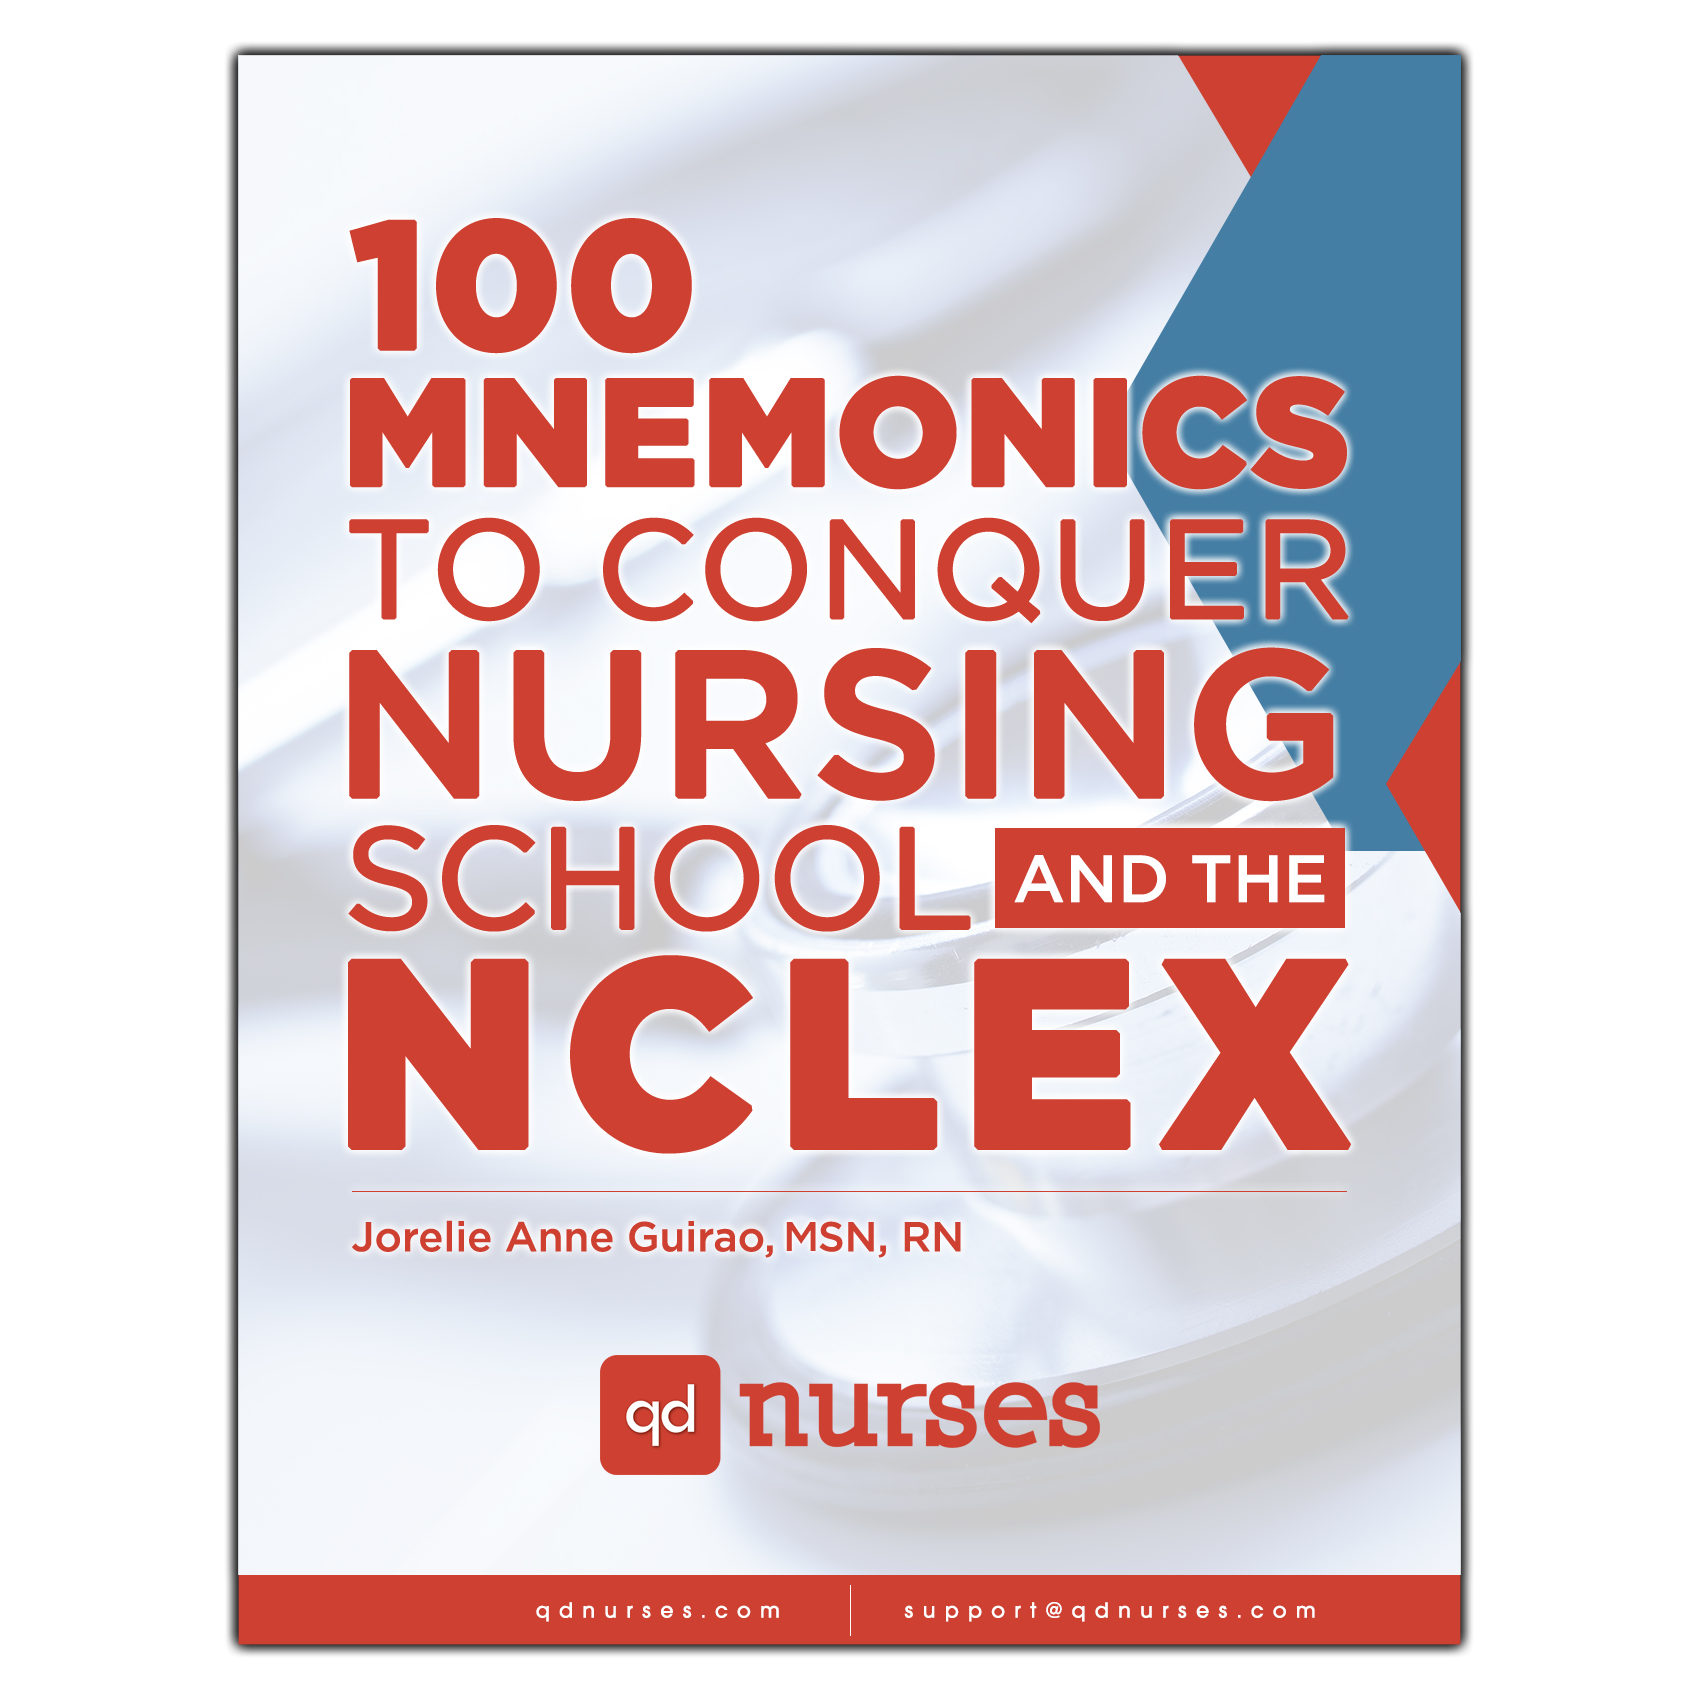 100 Mnemonics to Conquer Nursing School and the NCLEX (FREE!)